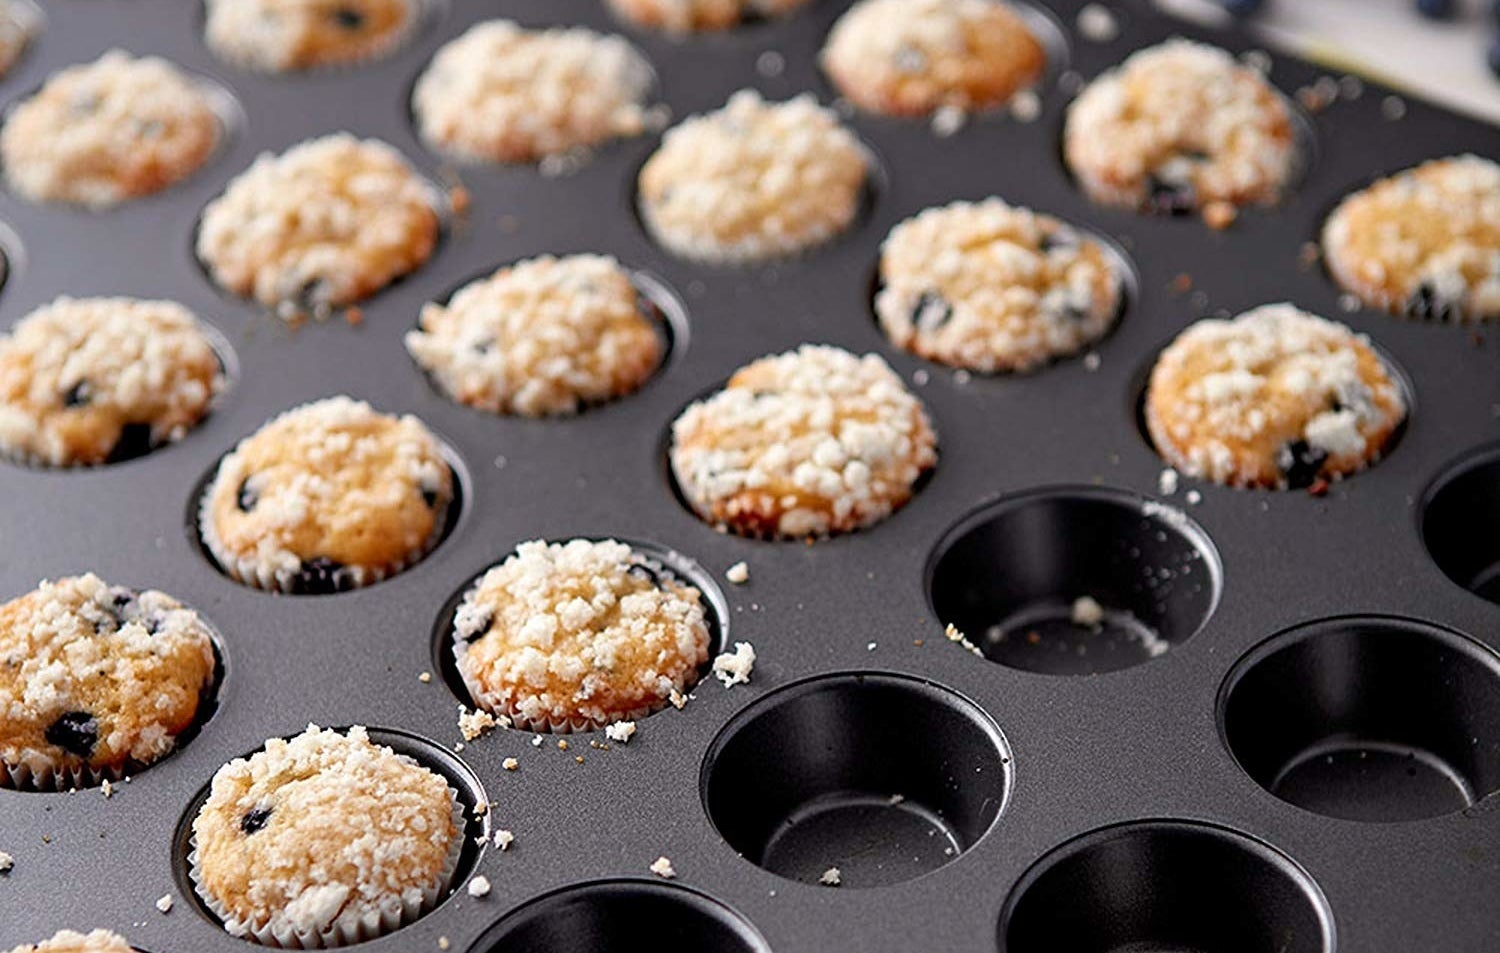 14 Baking Tools You Didn't Know You Needed